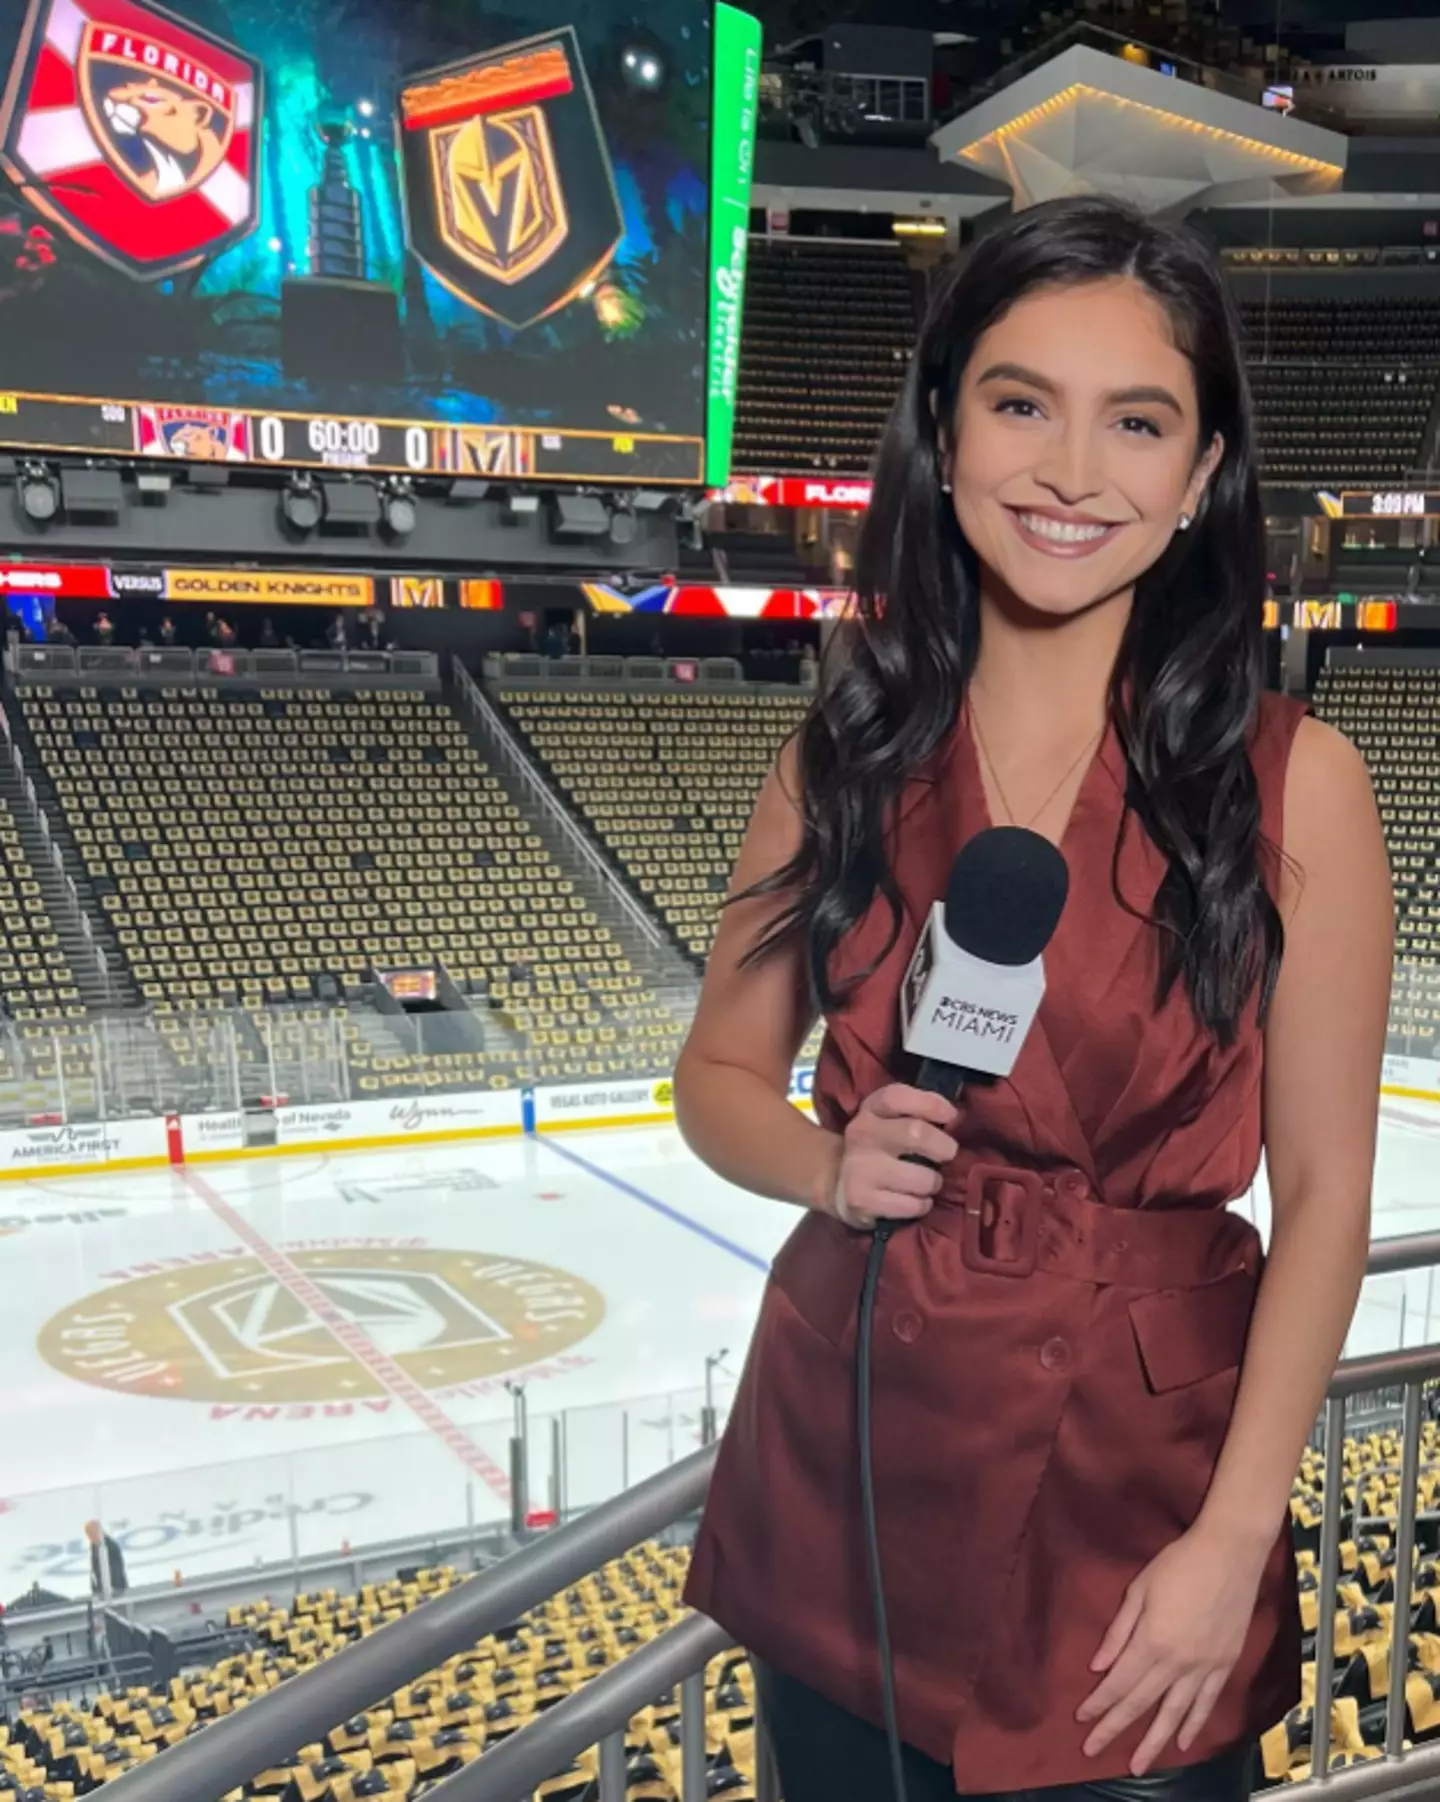 Samantha Rivera has been praised for her 'stiff arm' after a fan tried interrupting her broadcast.